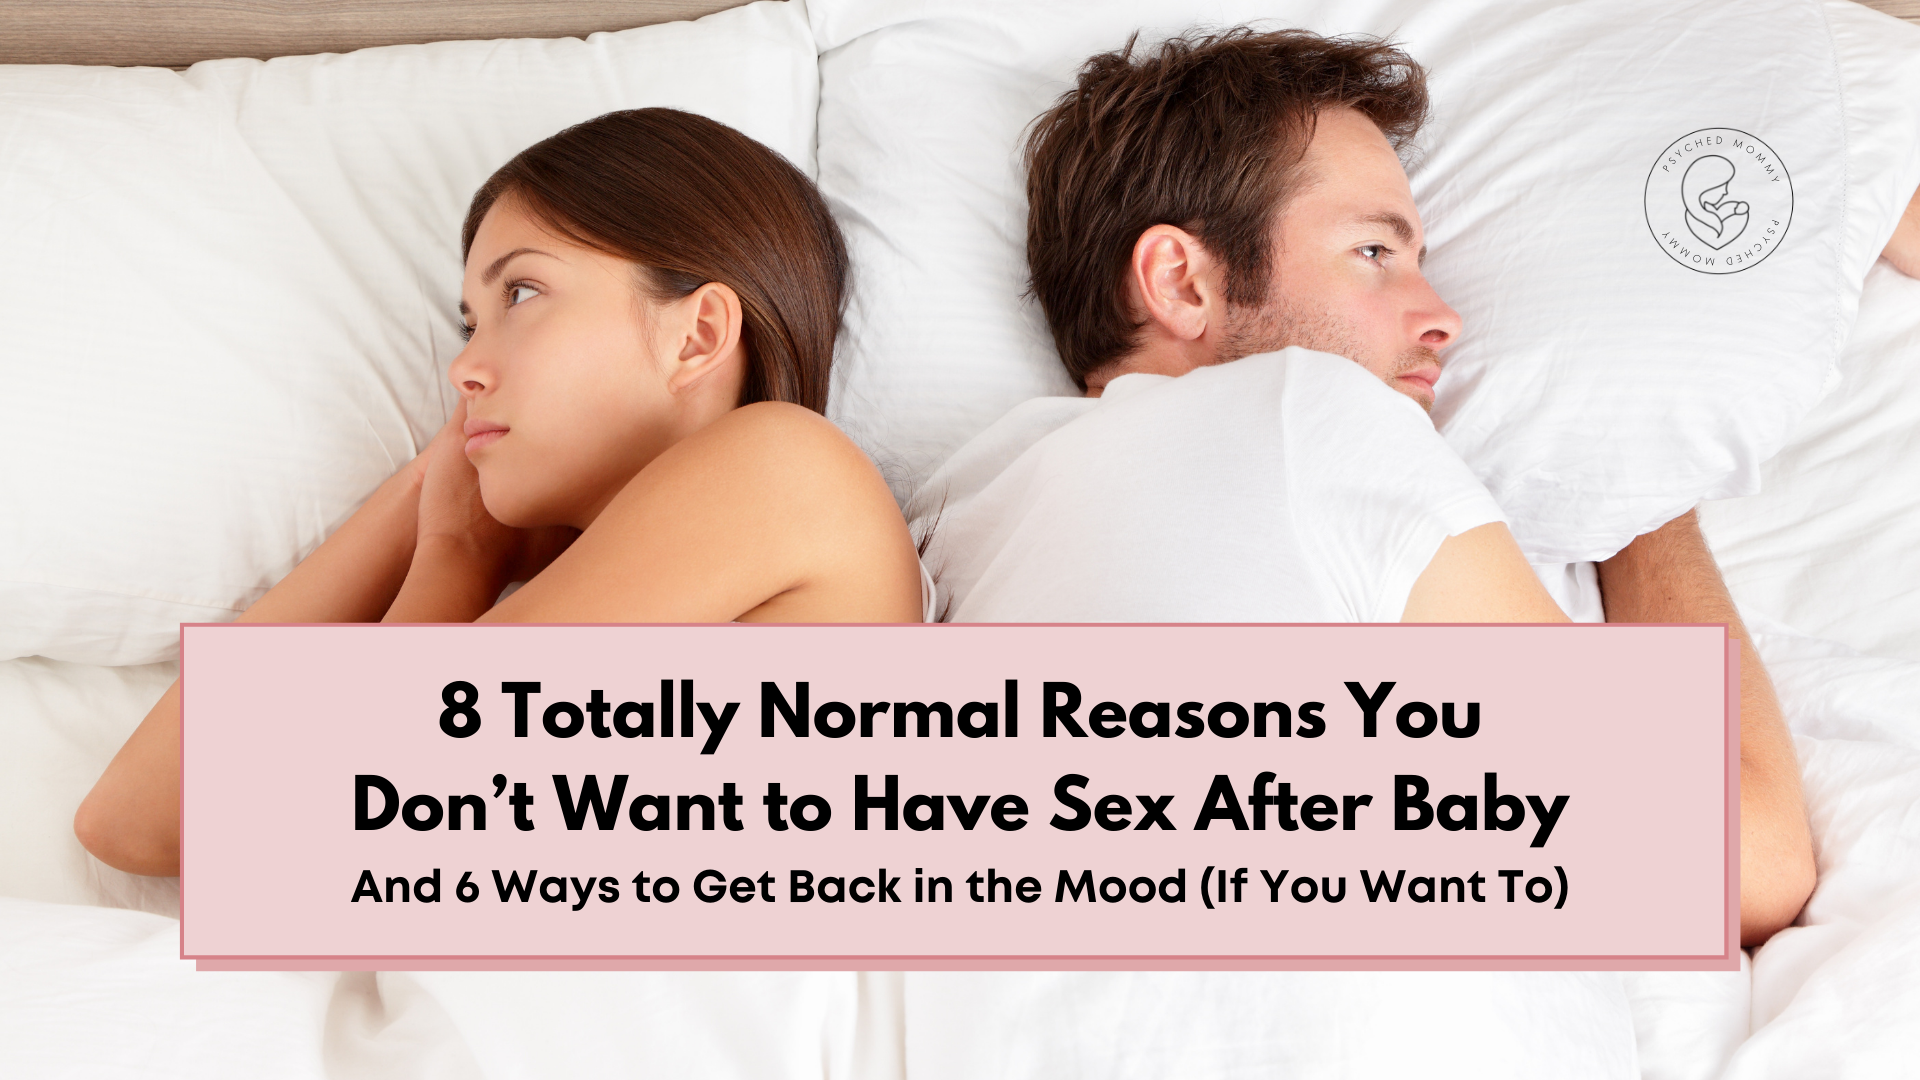 8 Totally Normal Reasons You Don't Want to Have Sex After Baby